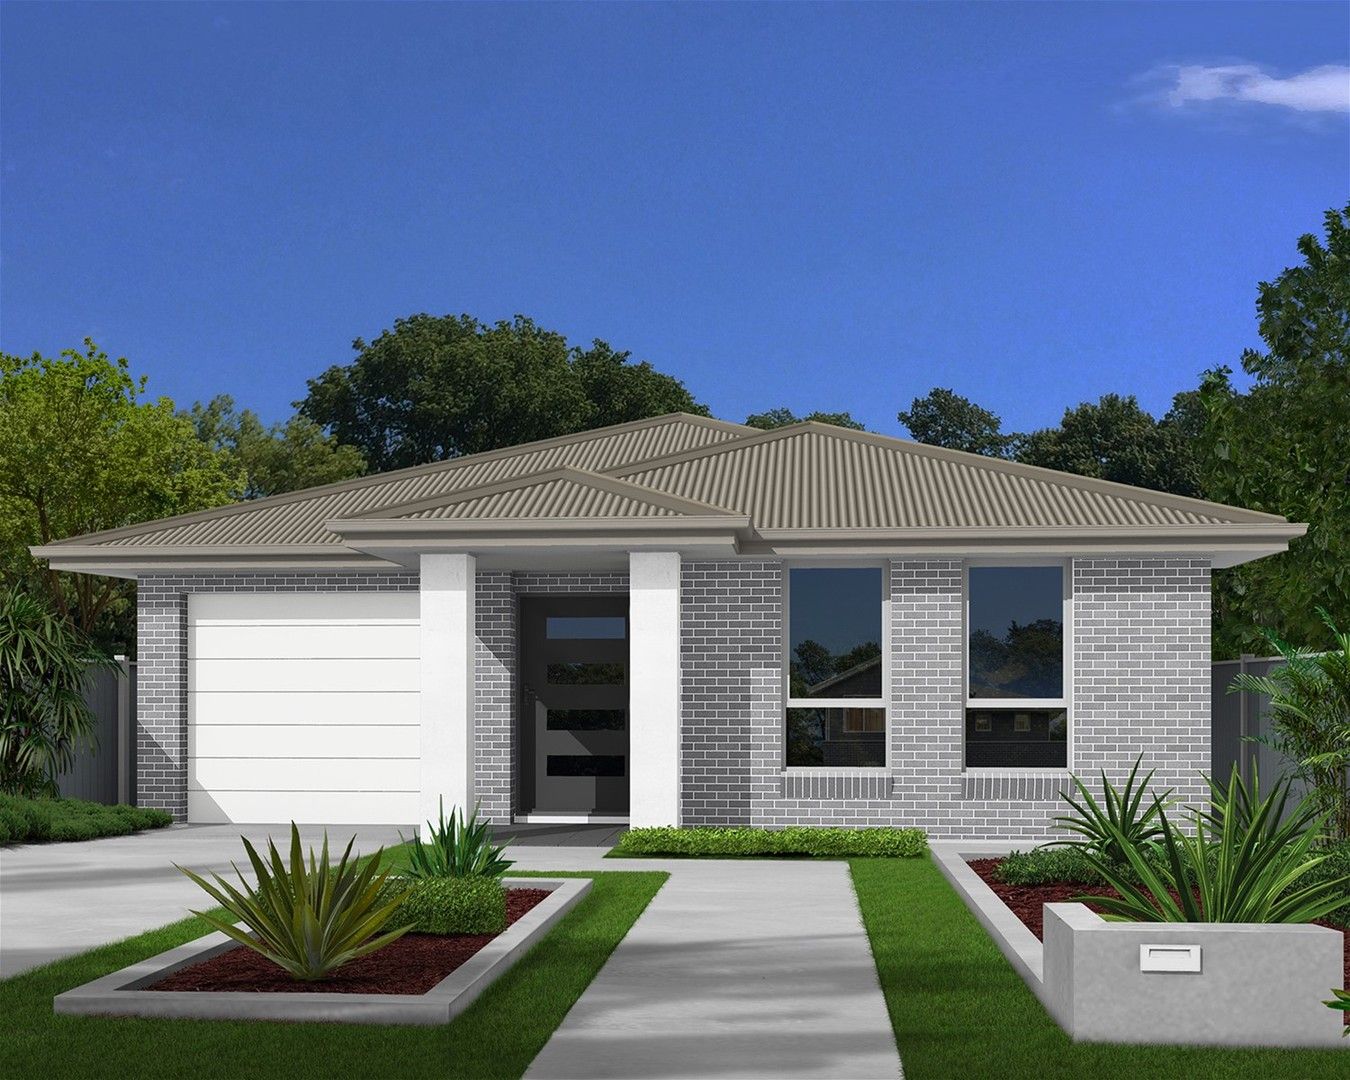 5 bedrooms New House & Land in Lot 53 Rinanna Place ST GEORGES BASIN NSW, 2540